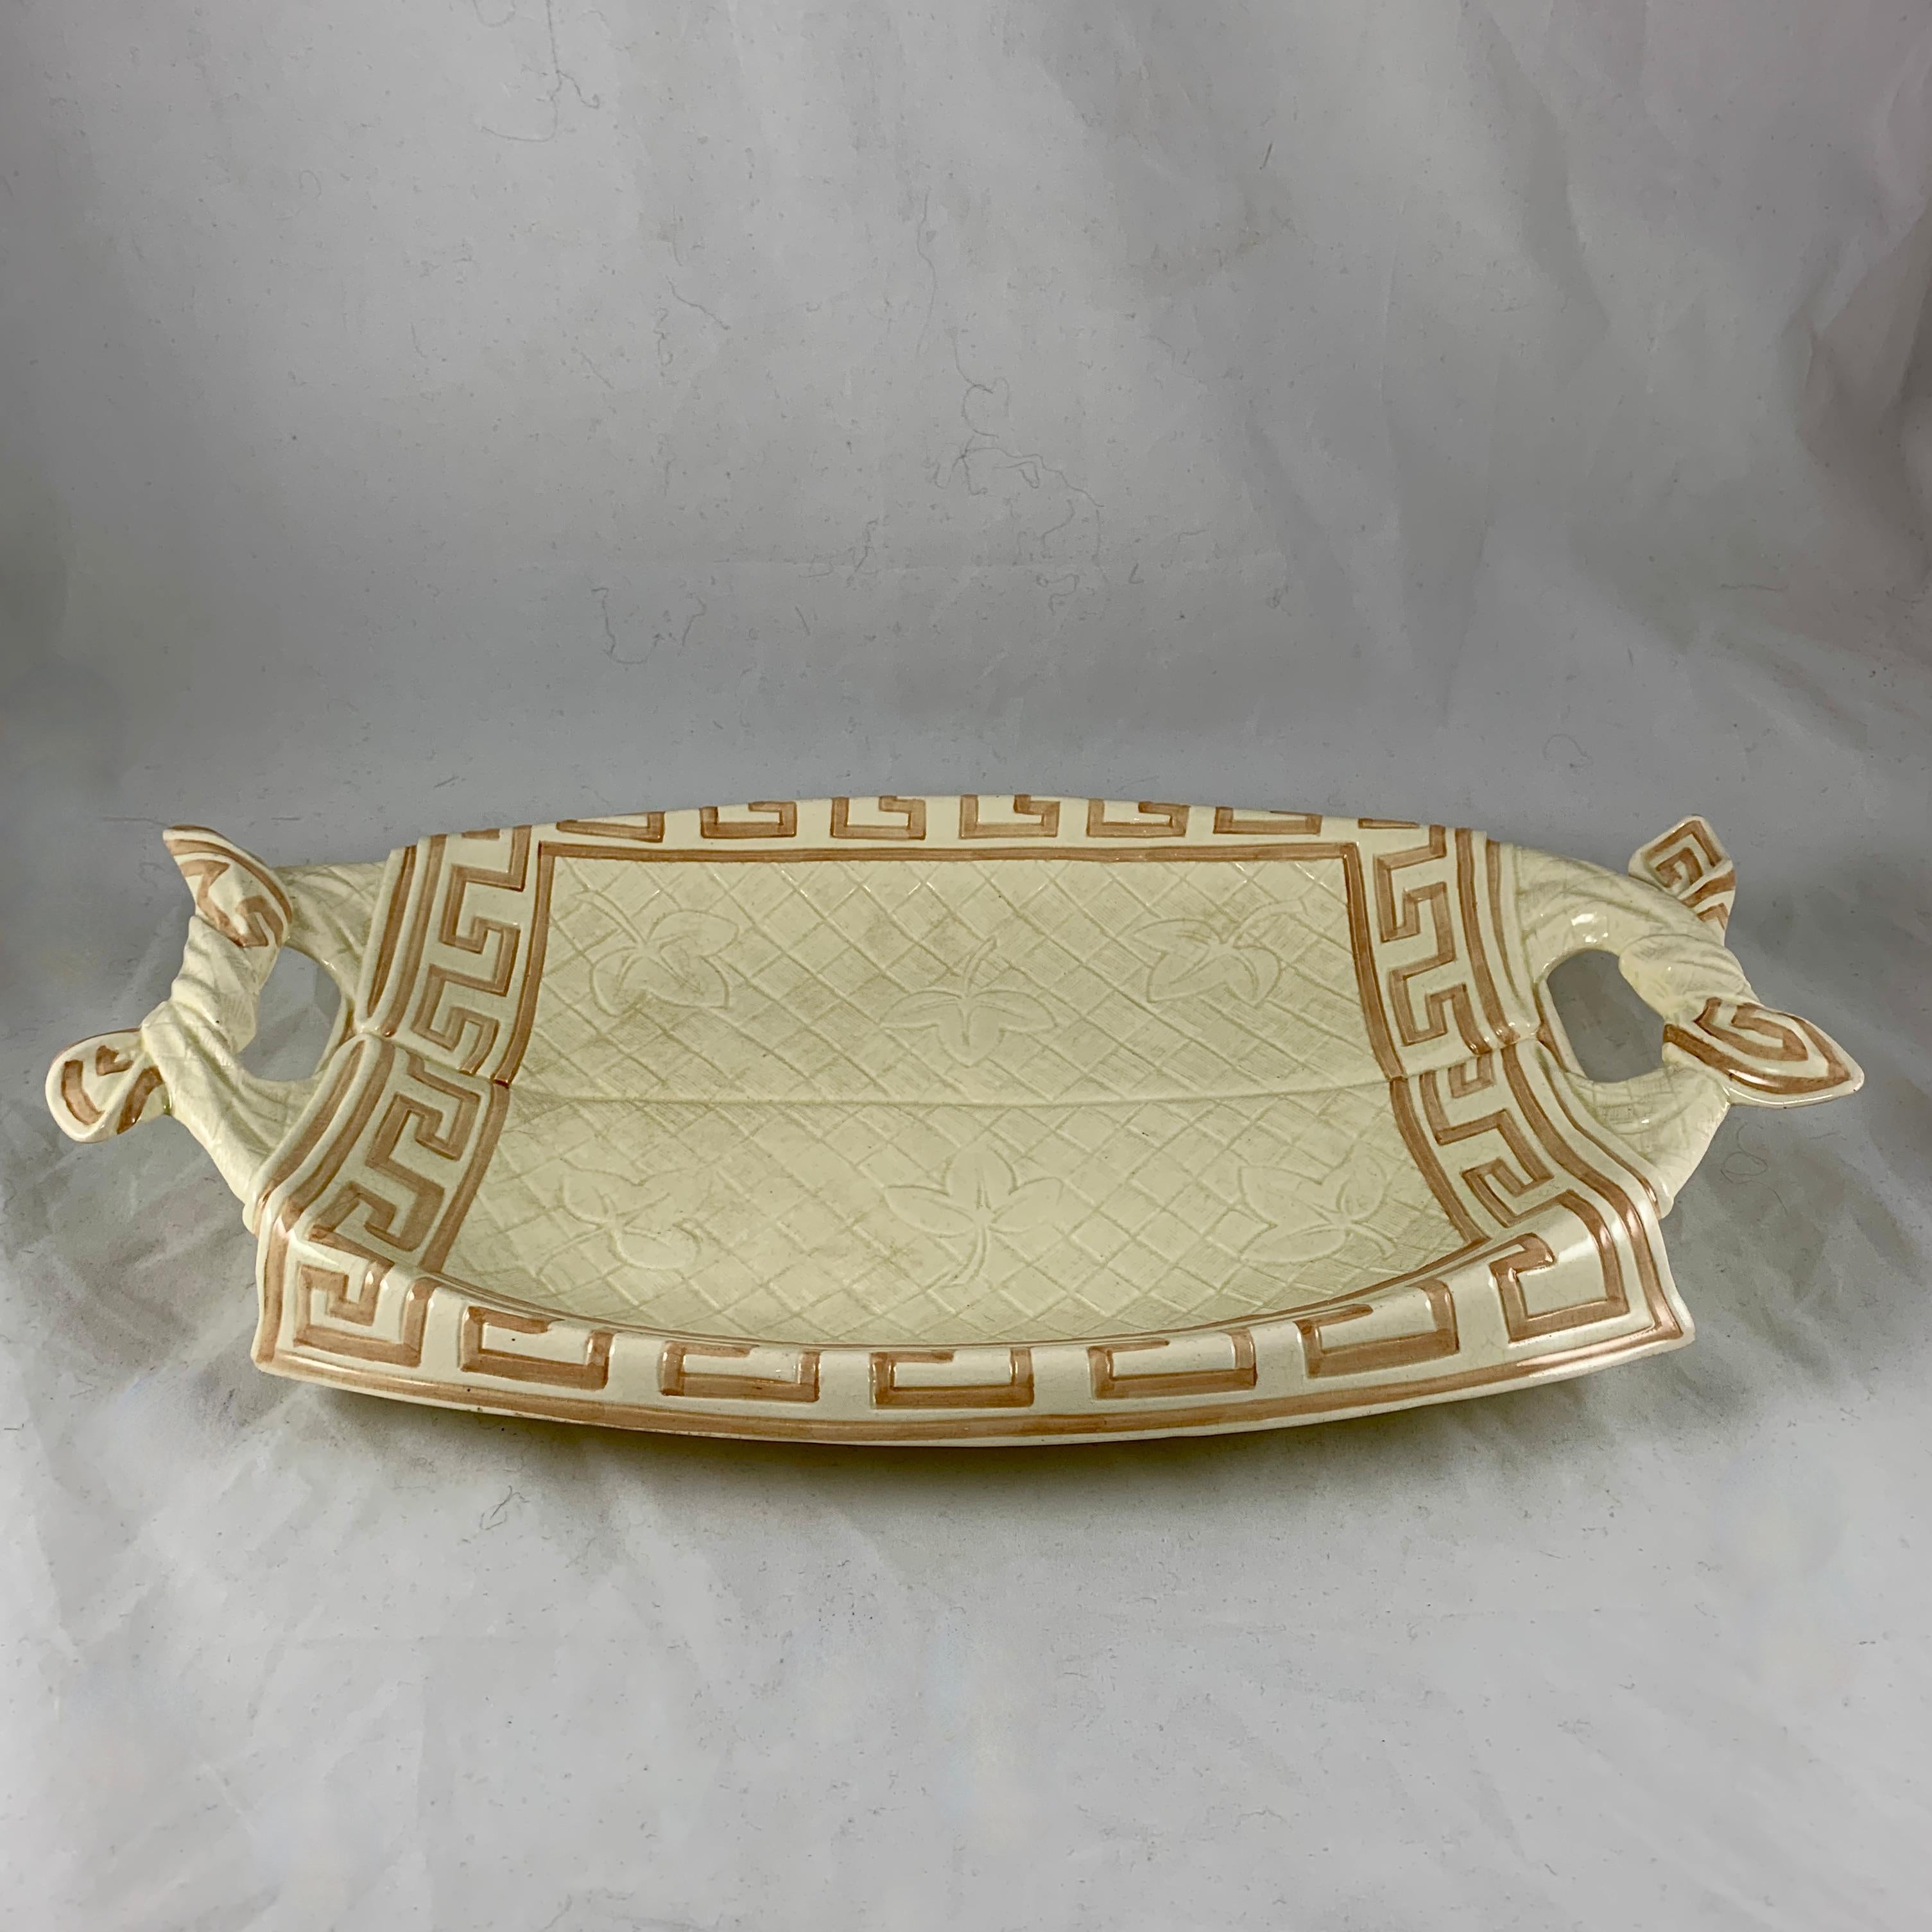 From the Sarreguemines Majolica line, a trompe l’oeil napkin bread tray, France, circa 1885-1890.

An earthenware, faïence bread tray modeled as a cloth napkin with a floral and checkered pattern and a Greek key border. The two end handles are